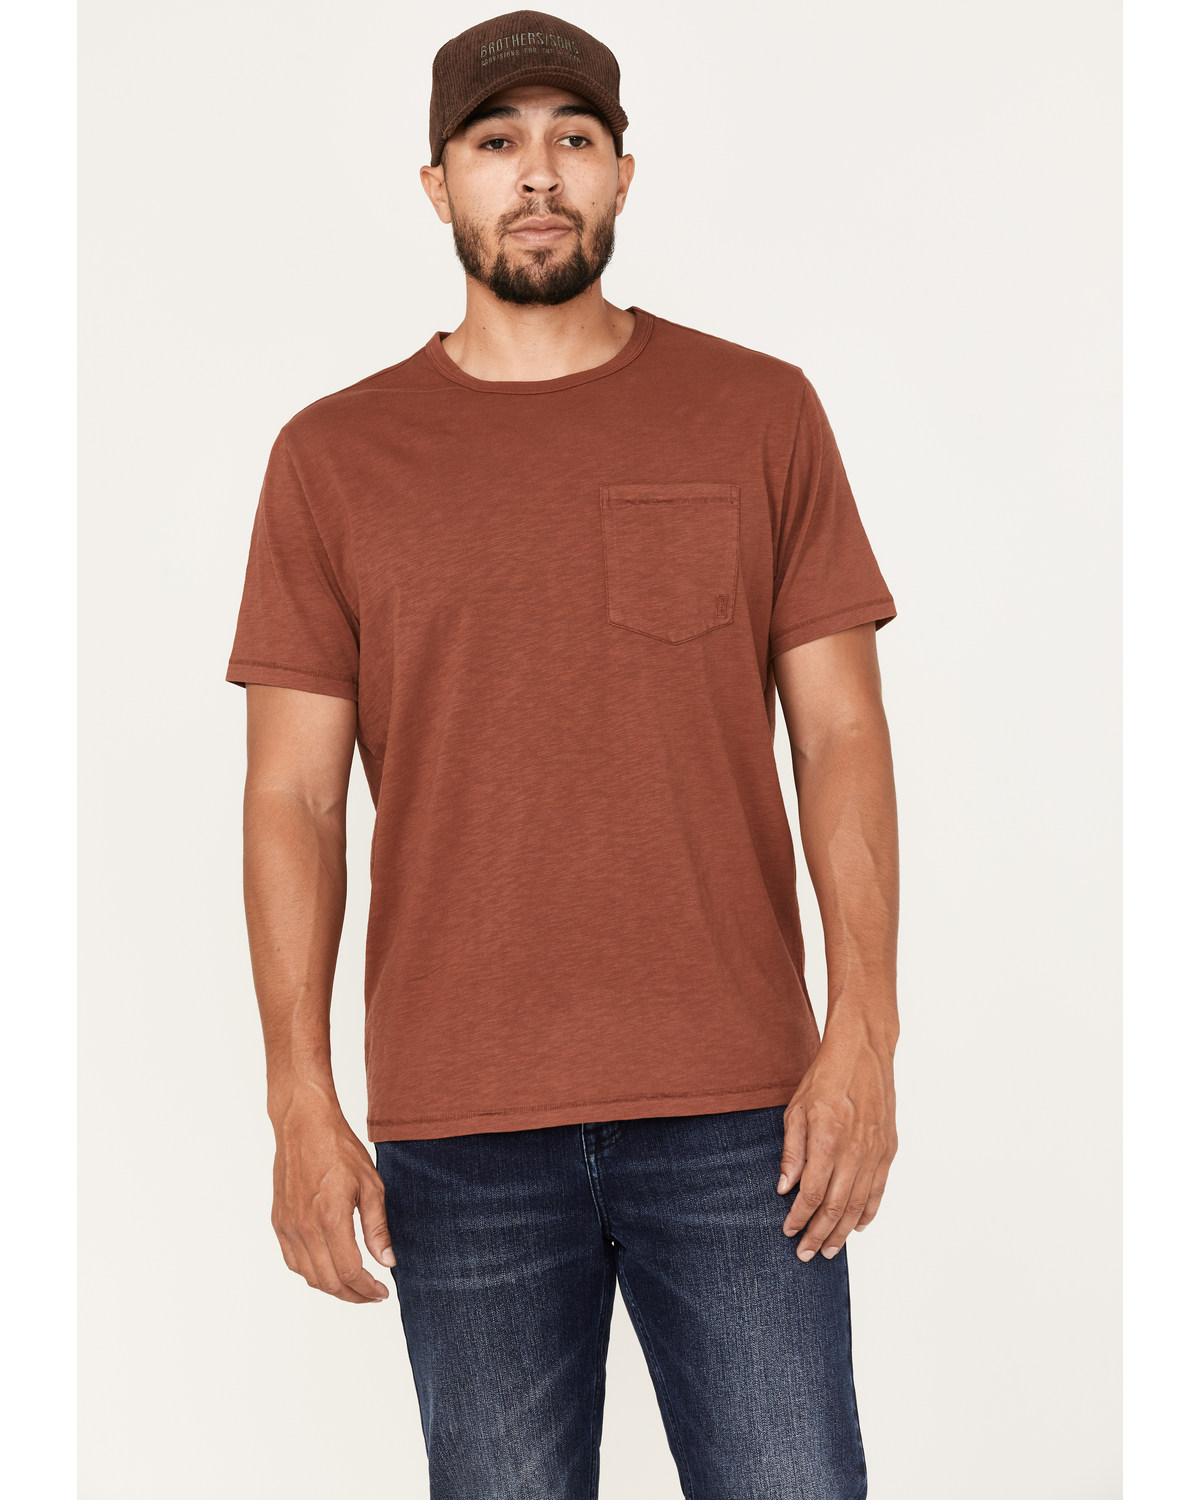 Brothers and Sons Men's Solid Basic Pocket T-Shirt